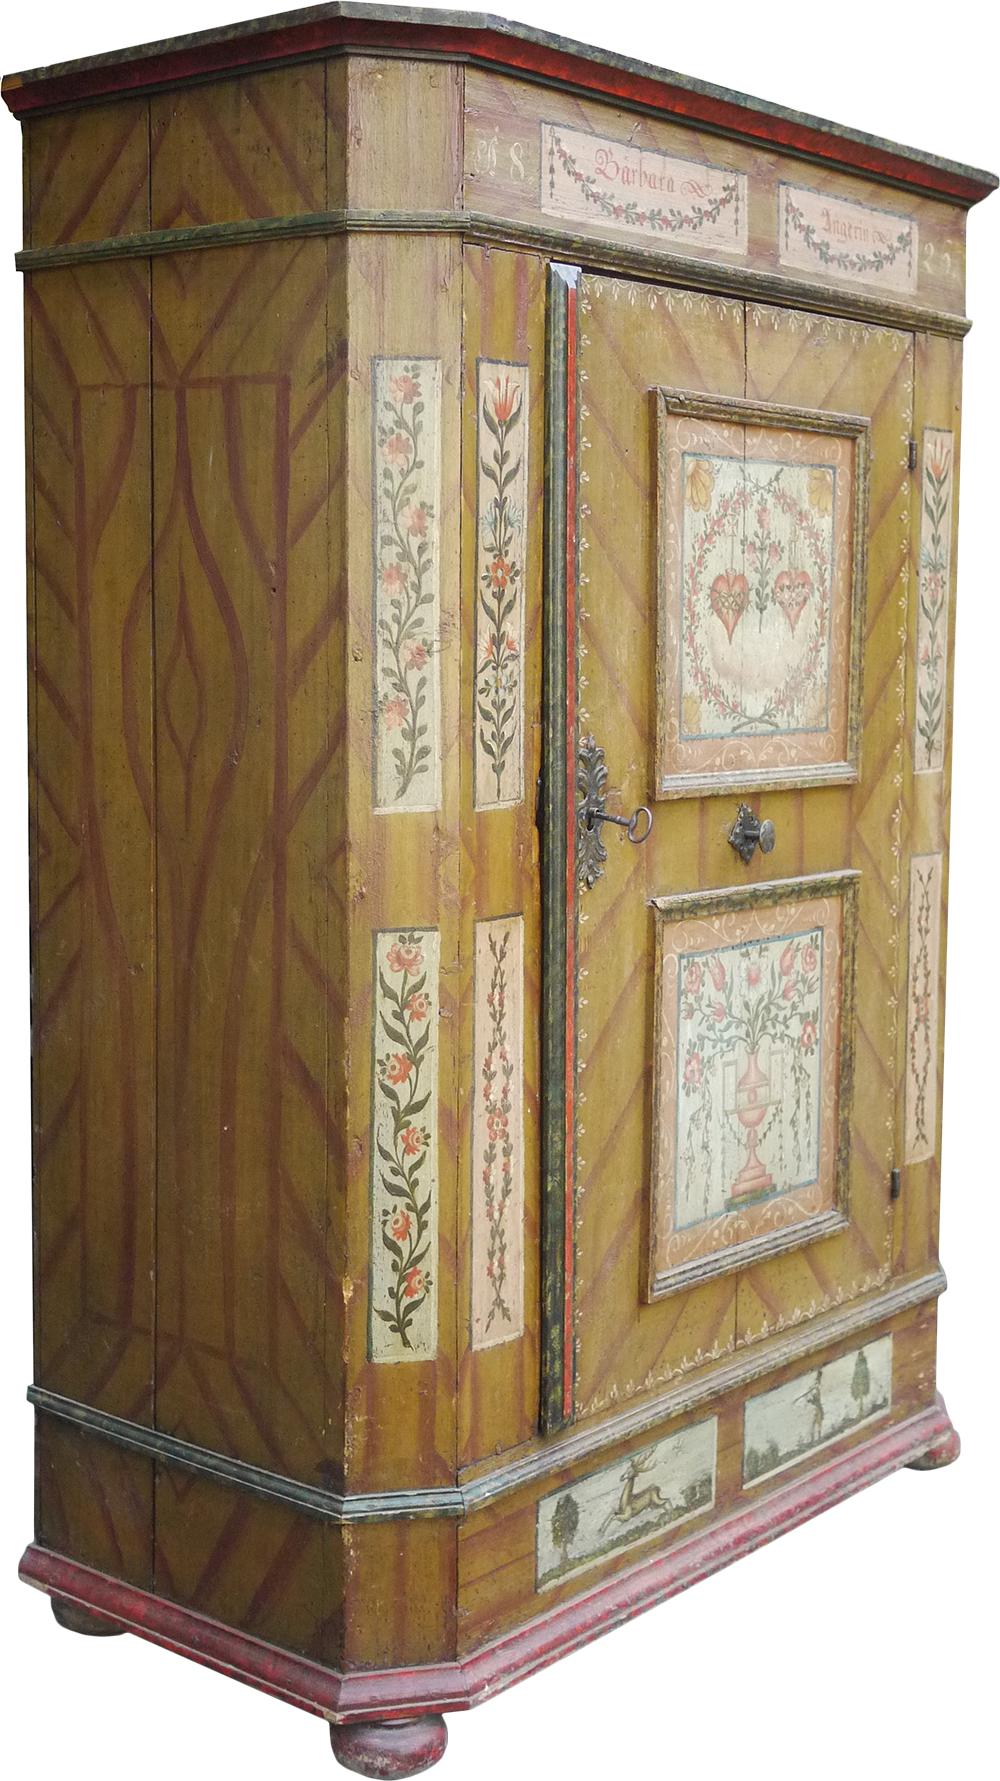 Two doors painted wardrobe

Measures: H.173cm – L.117cm (126 alle cornici) – P.54cm (58 alle cornici)
H. 68 in - W. 46 in (49.5 to the frames) - D. 21 in (23 to the frames)

Tyrolean painted wardrobe with one door, ocher / brown, with fake wood